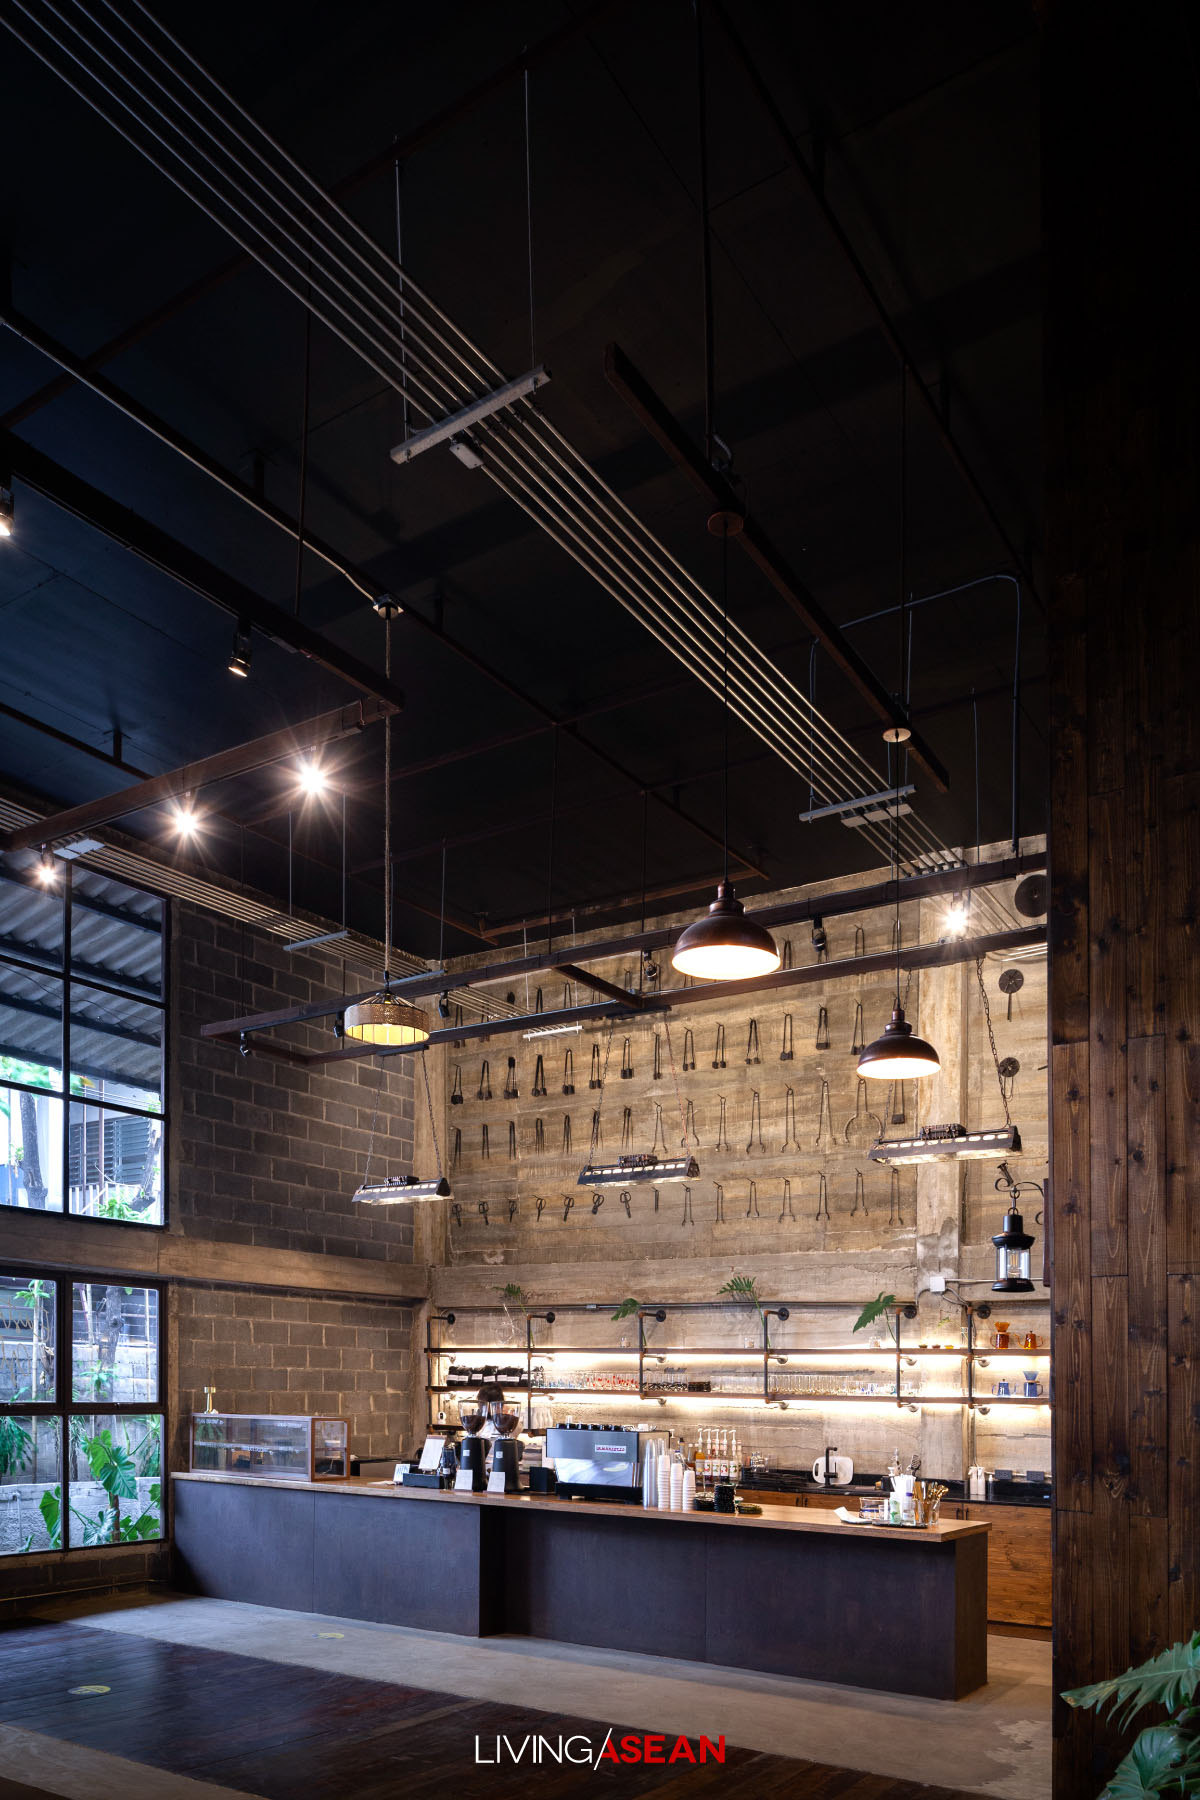 Easternglass Café the Beauty of an Industrial Loft Space